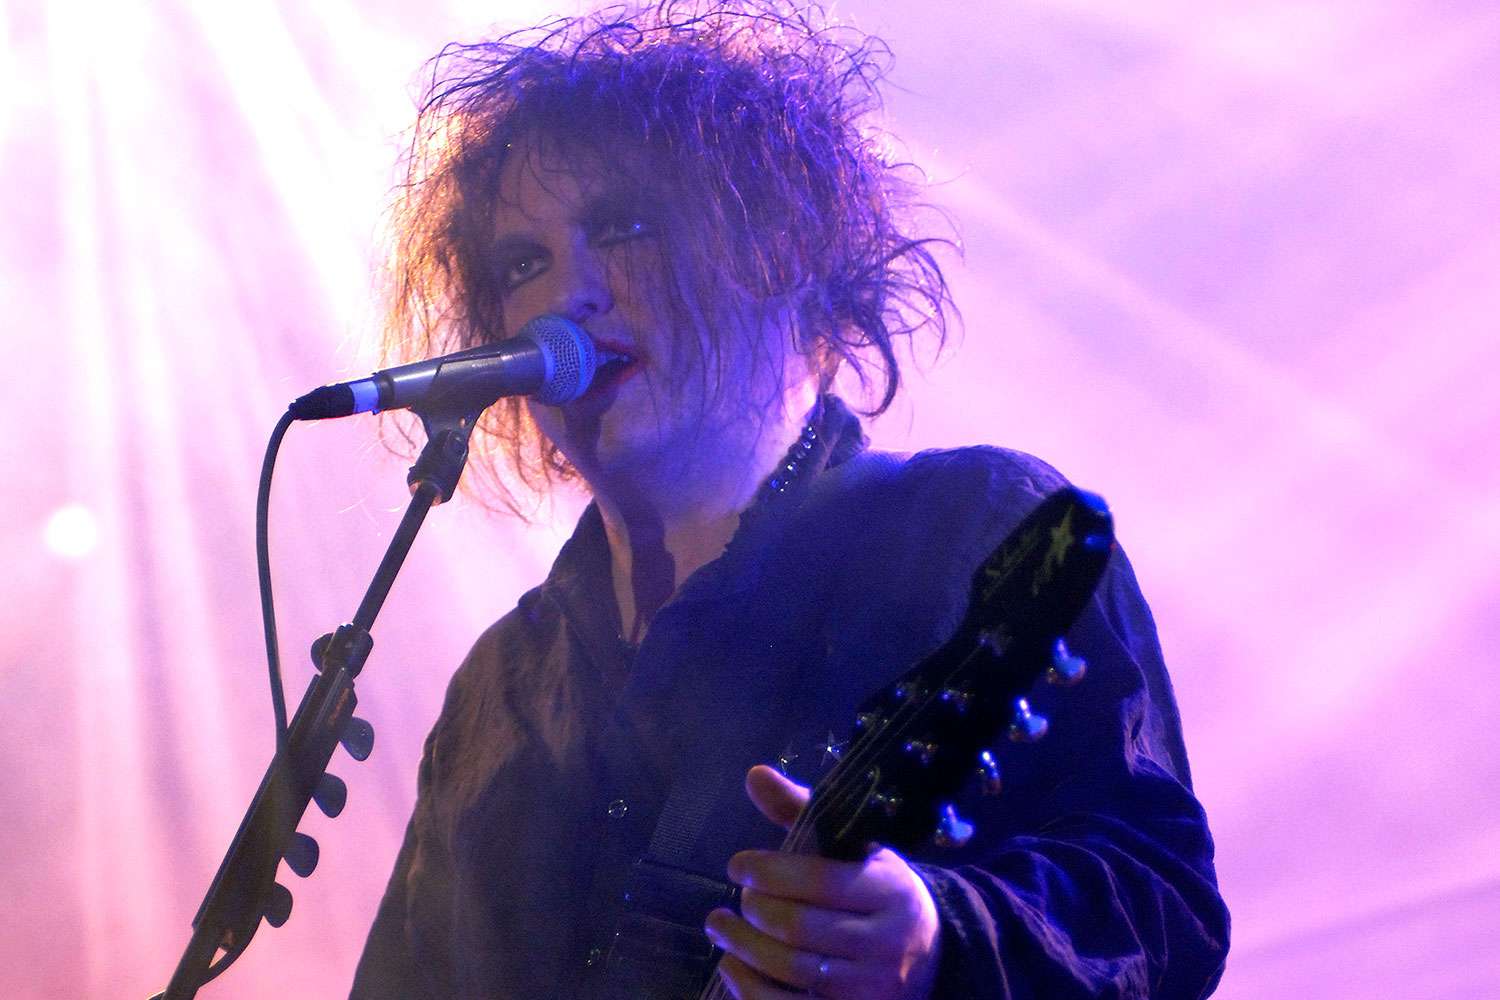 Robert Smith of The Cure performs during the Download Festival at Shoreline Amphitheatre on October 6, 2007 in Mountain View, California. (Photo by Tim Mosenfelder/Getty Images)